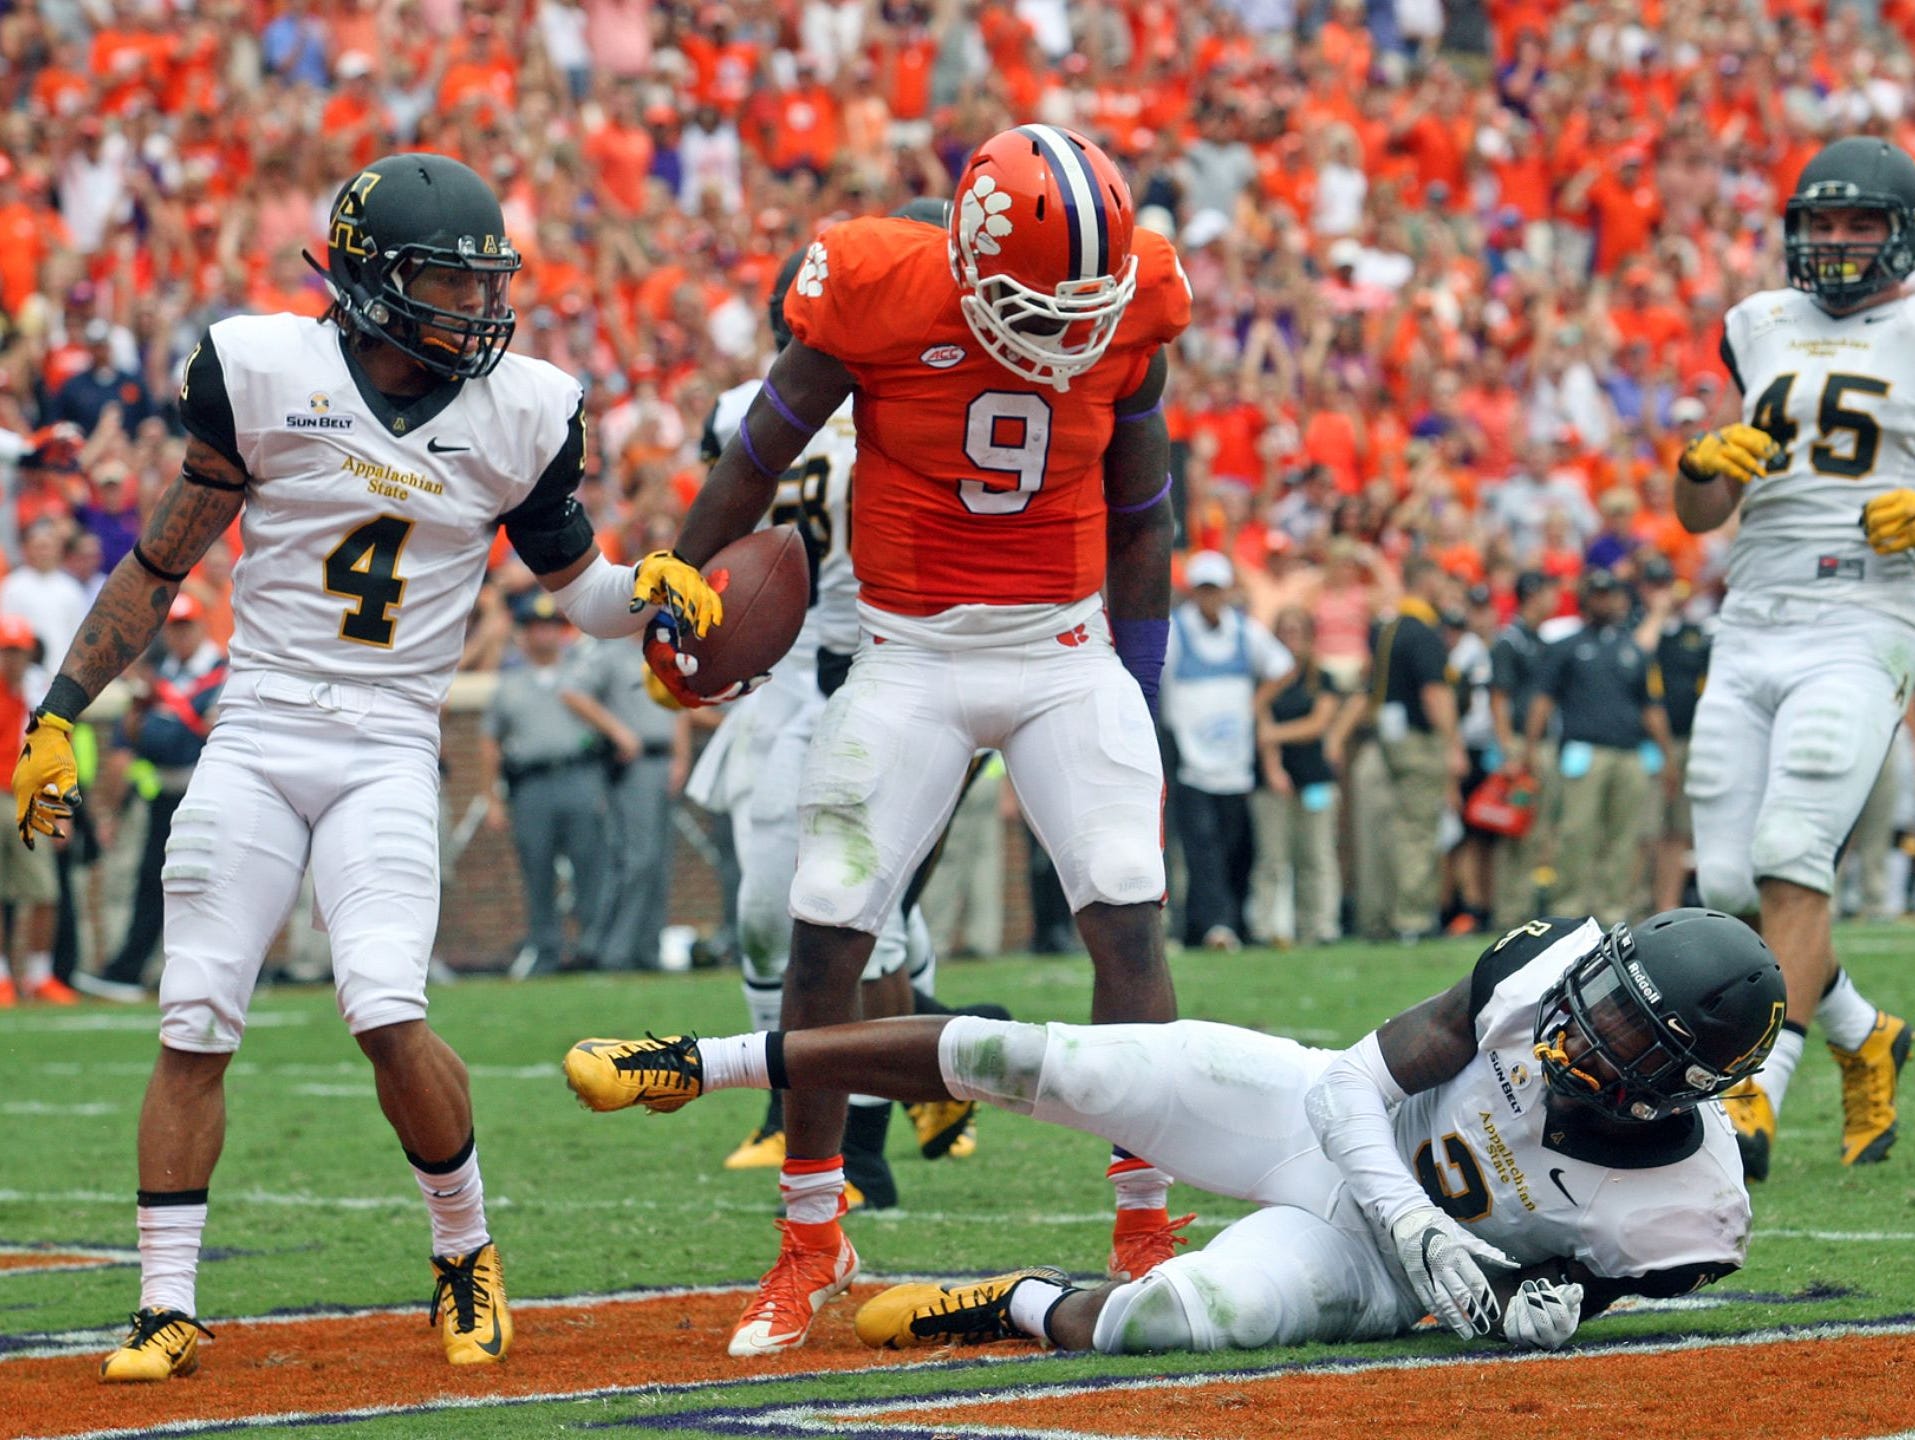 Wayne Gallman (9) reacts after bulling his way past an Appalachian State defender for a touchdown on Sept. 12.